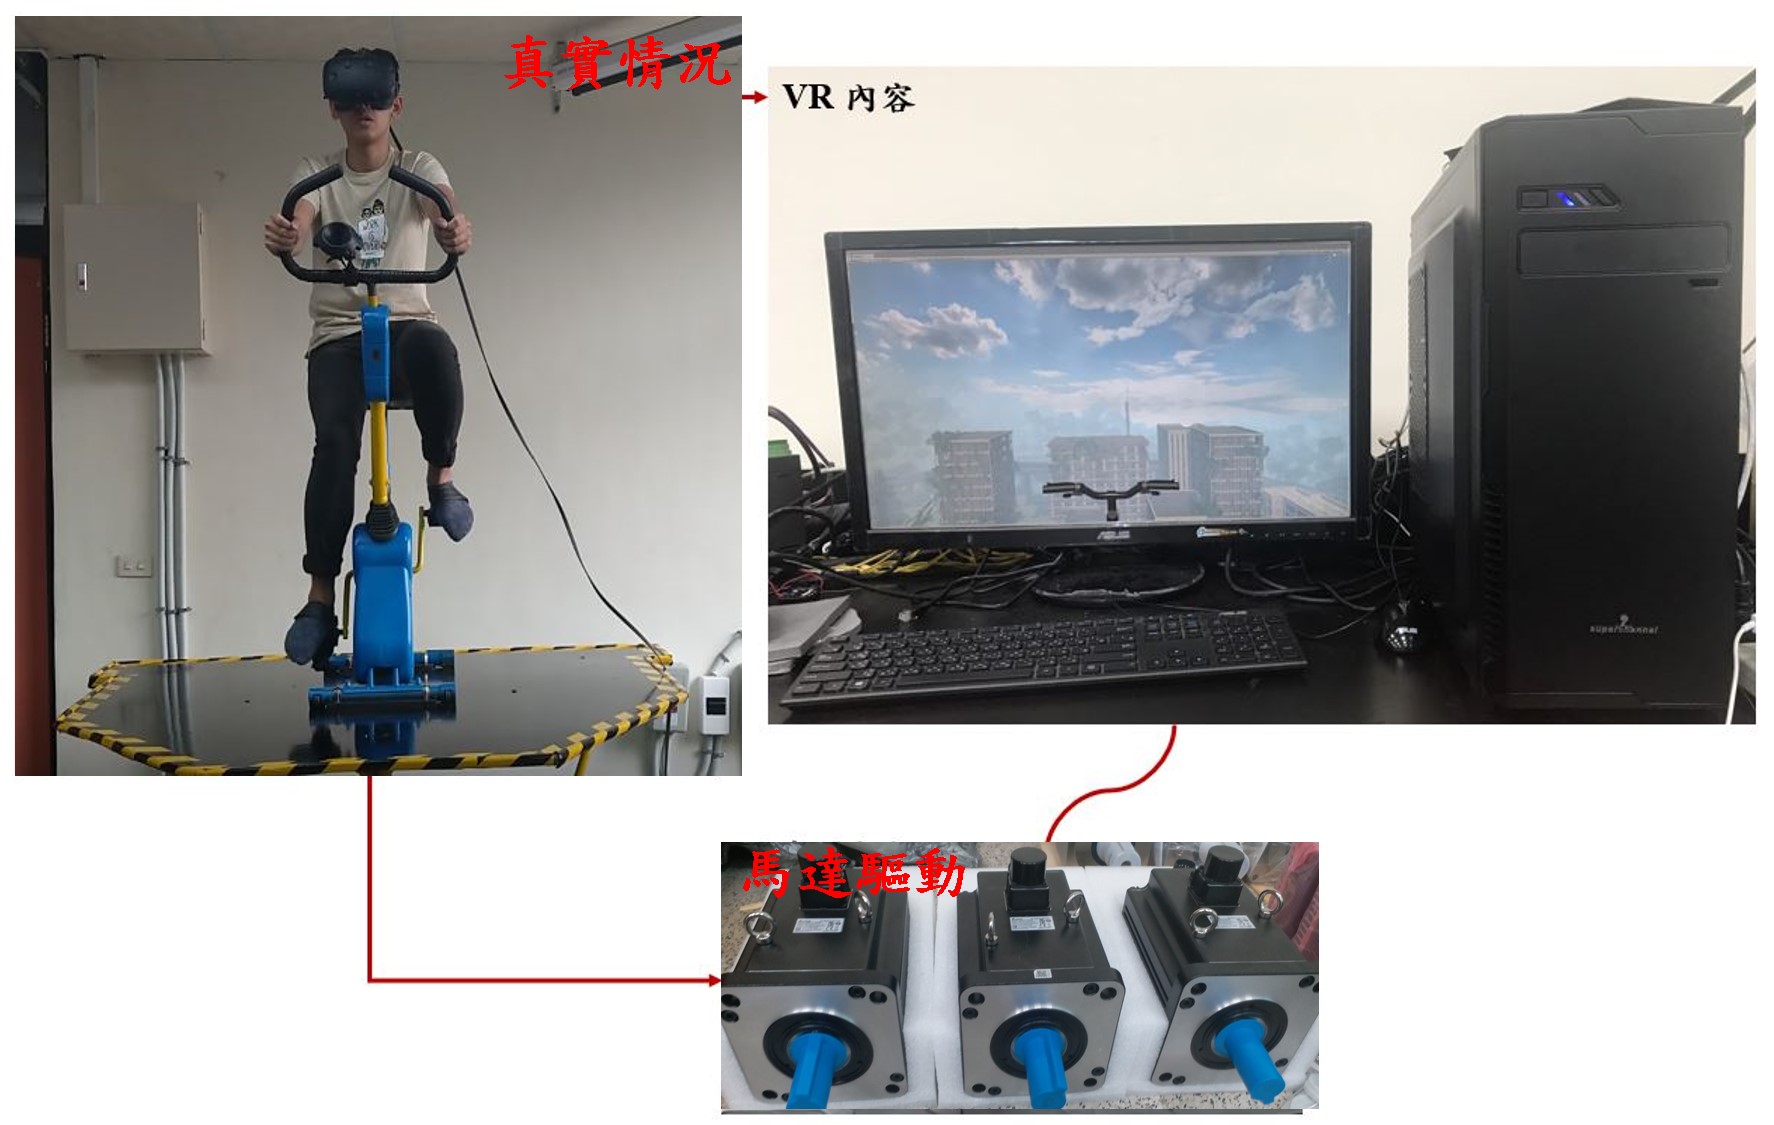 Integration of multi-axis motion-assistive platform with virtual reality imagery for rehabilitation purpose